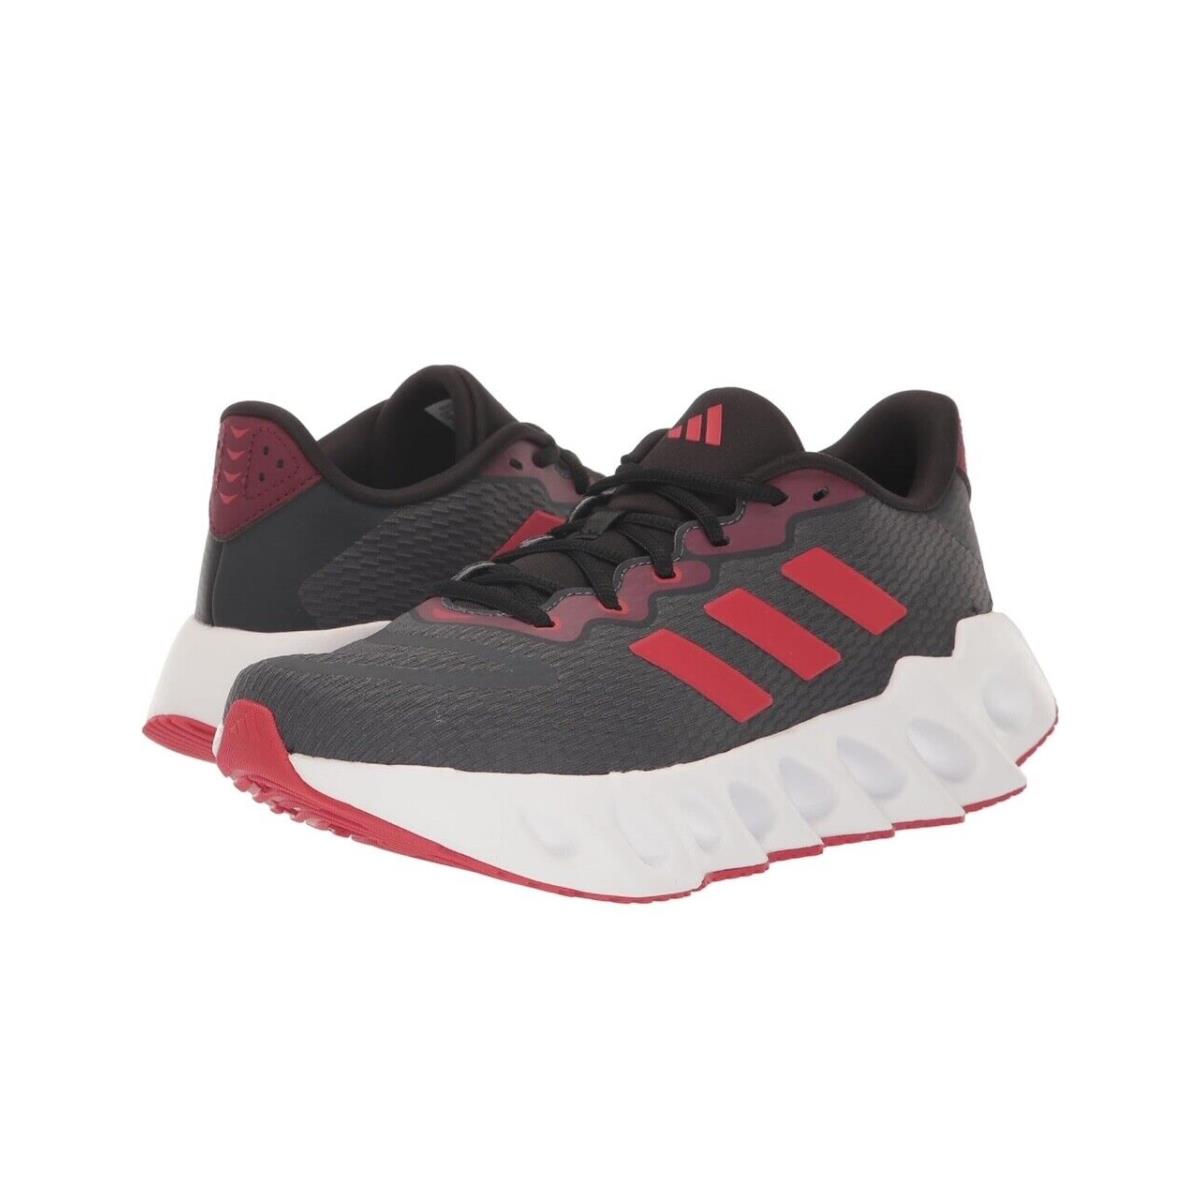 Adidas Men`s Switch Running Shoes Grey/better Scarlet/solar Red Size: 10 M